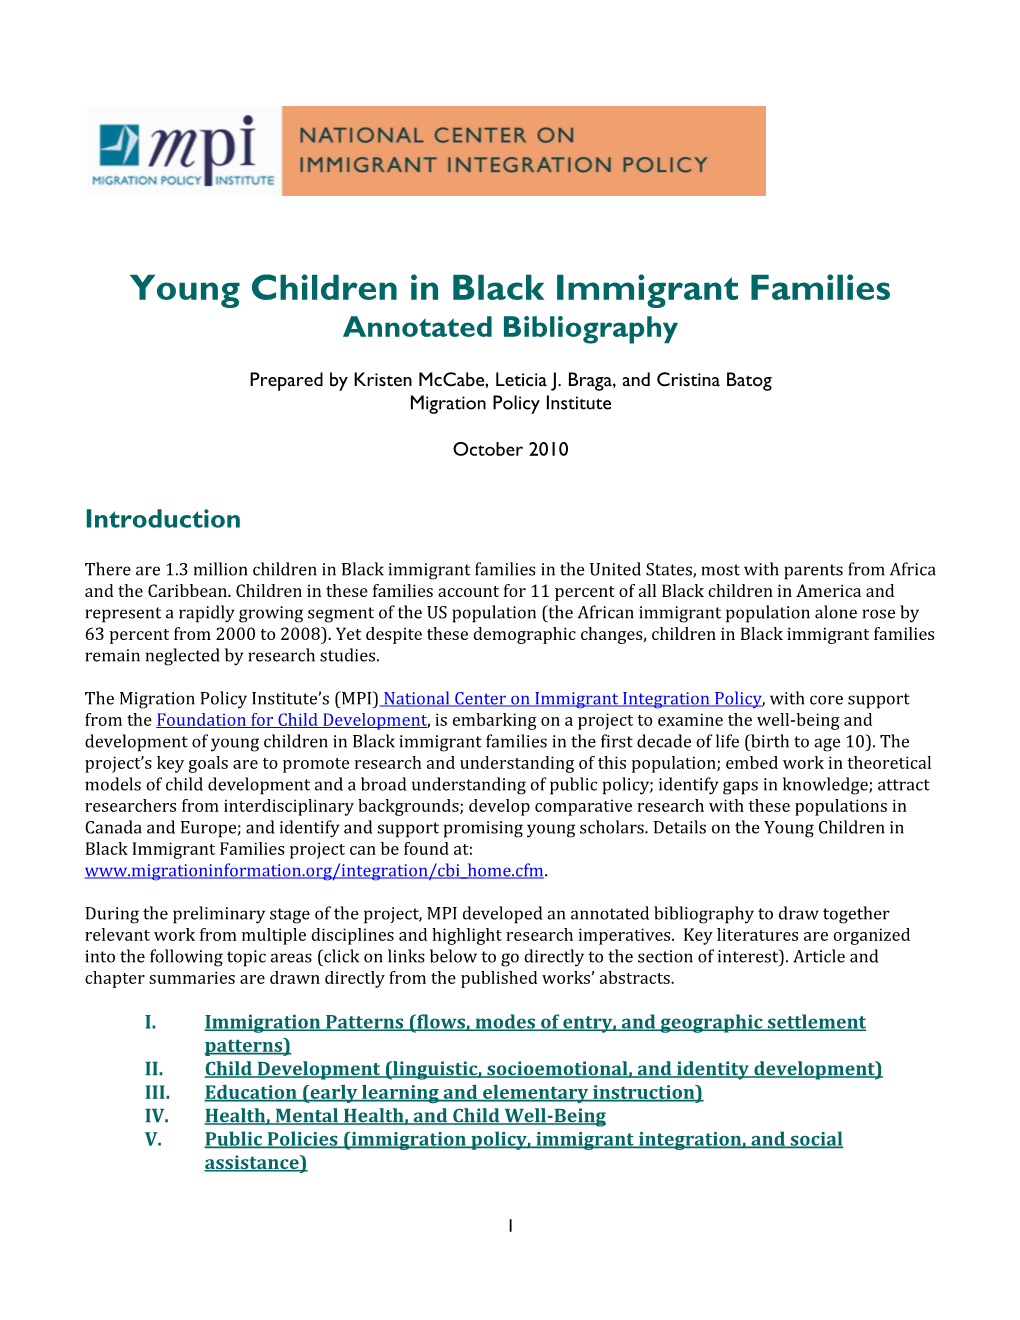 Young Children in Black Immigrant Families Annotated Bibliography